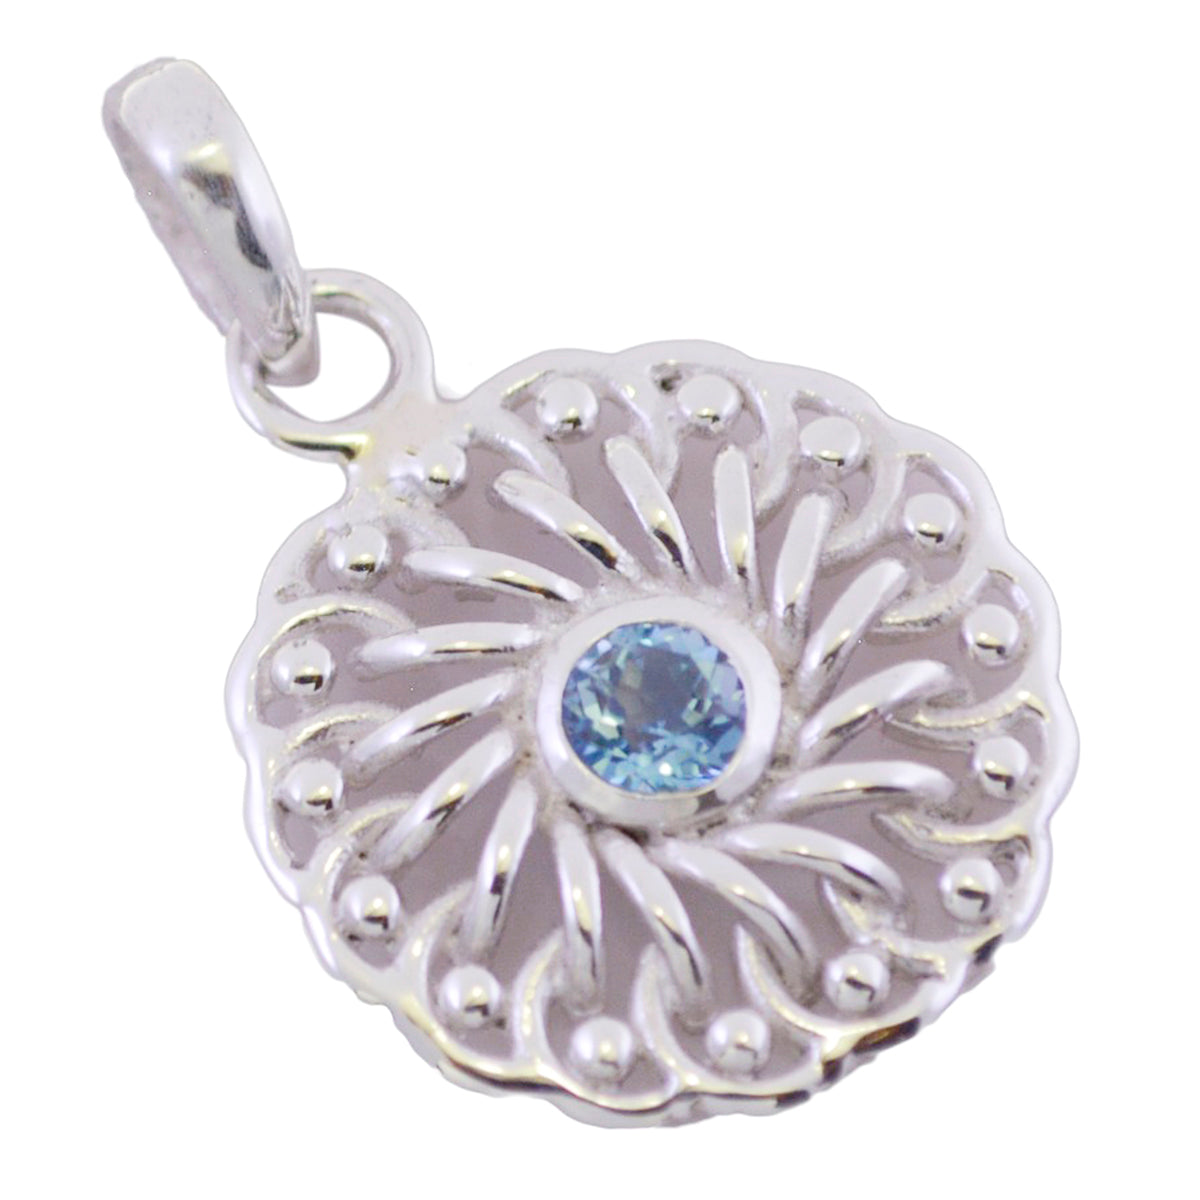 Riyo Good Gemstones Round Faceted Blue Blue Topaz 925 Sterling Silver Pendant thanks giving gift